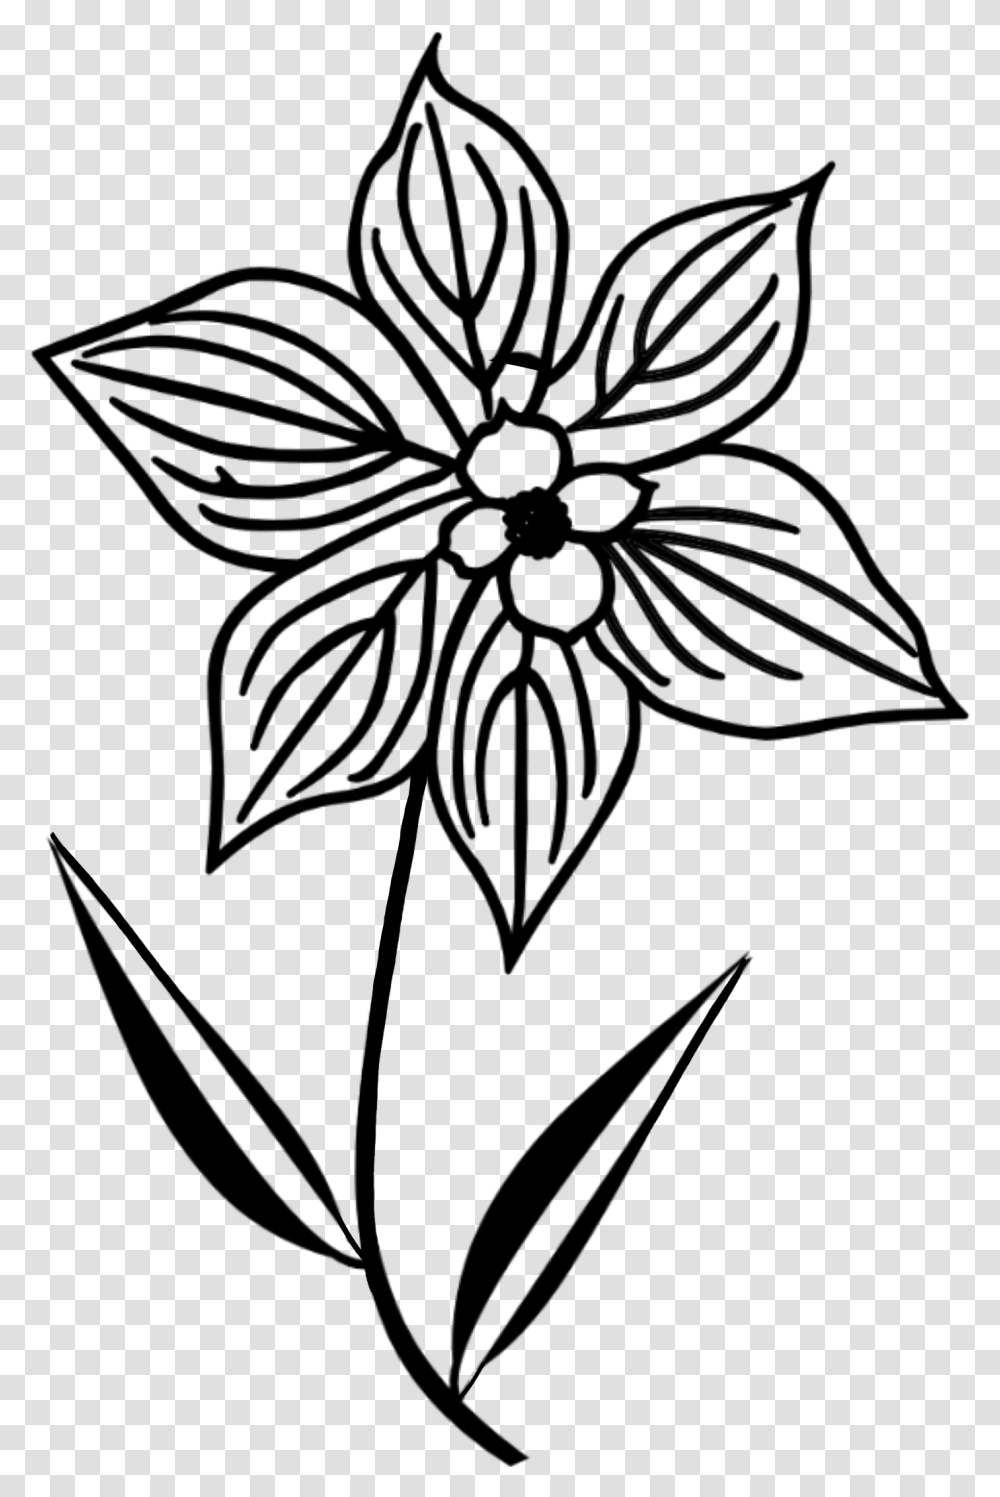 Doodle Flower Silhouettesome Outline Of A Flower, Gray Transparent Png